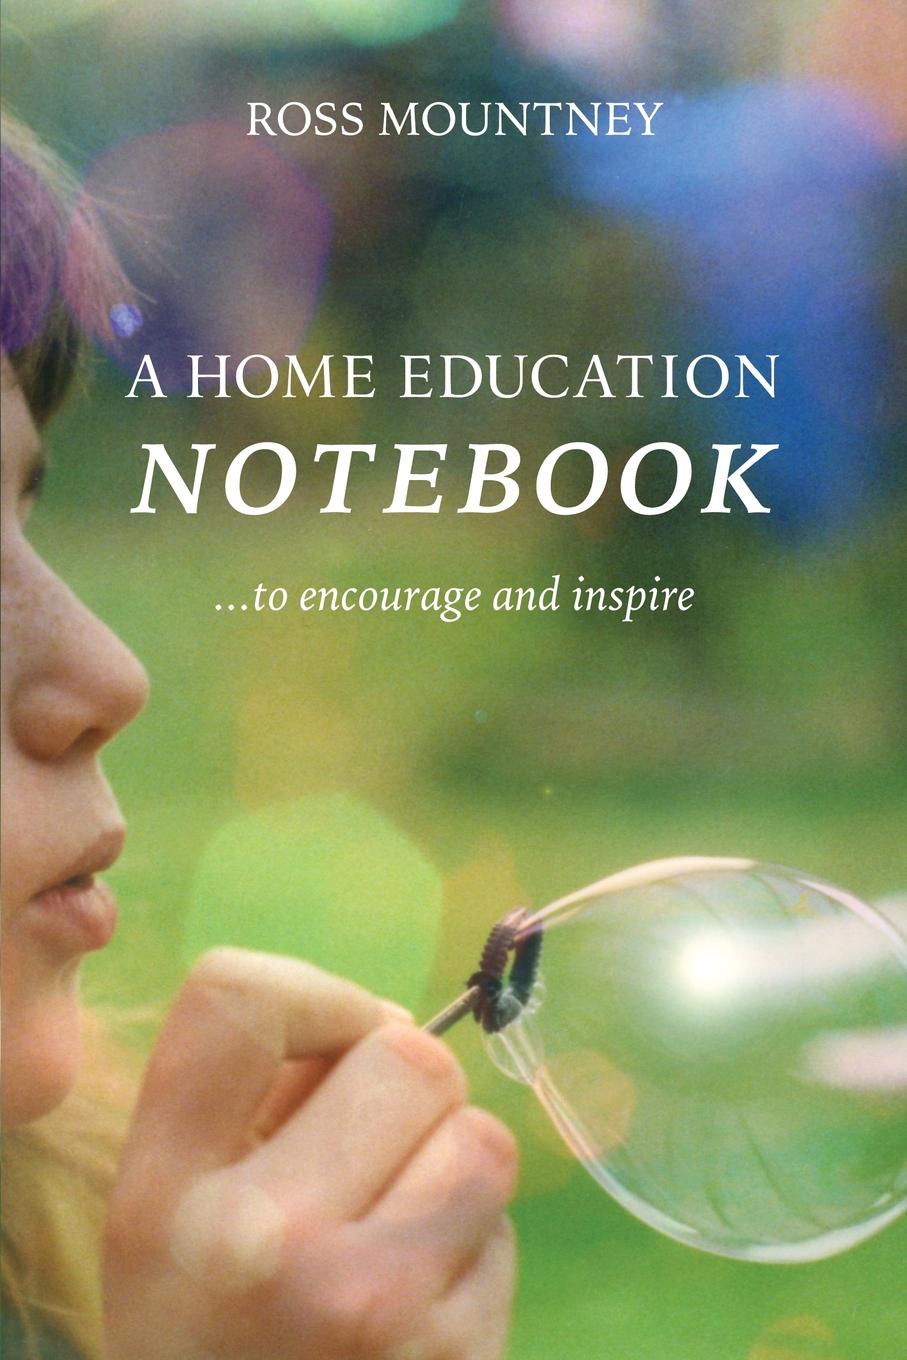 A Home Education Notebook. to encourage and inspire